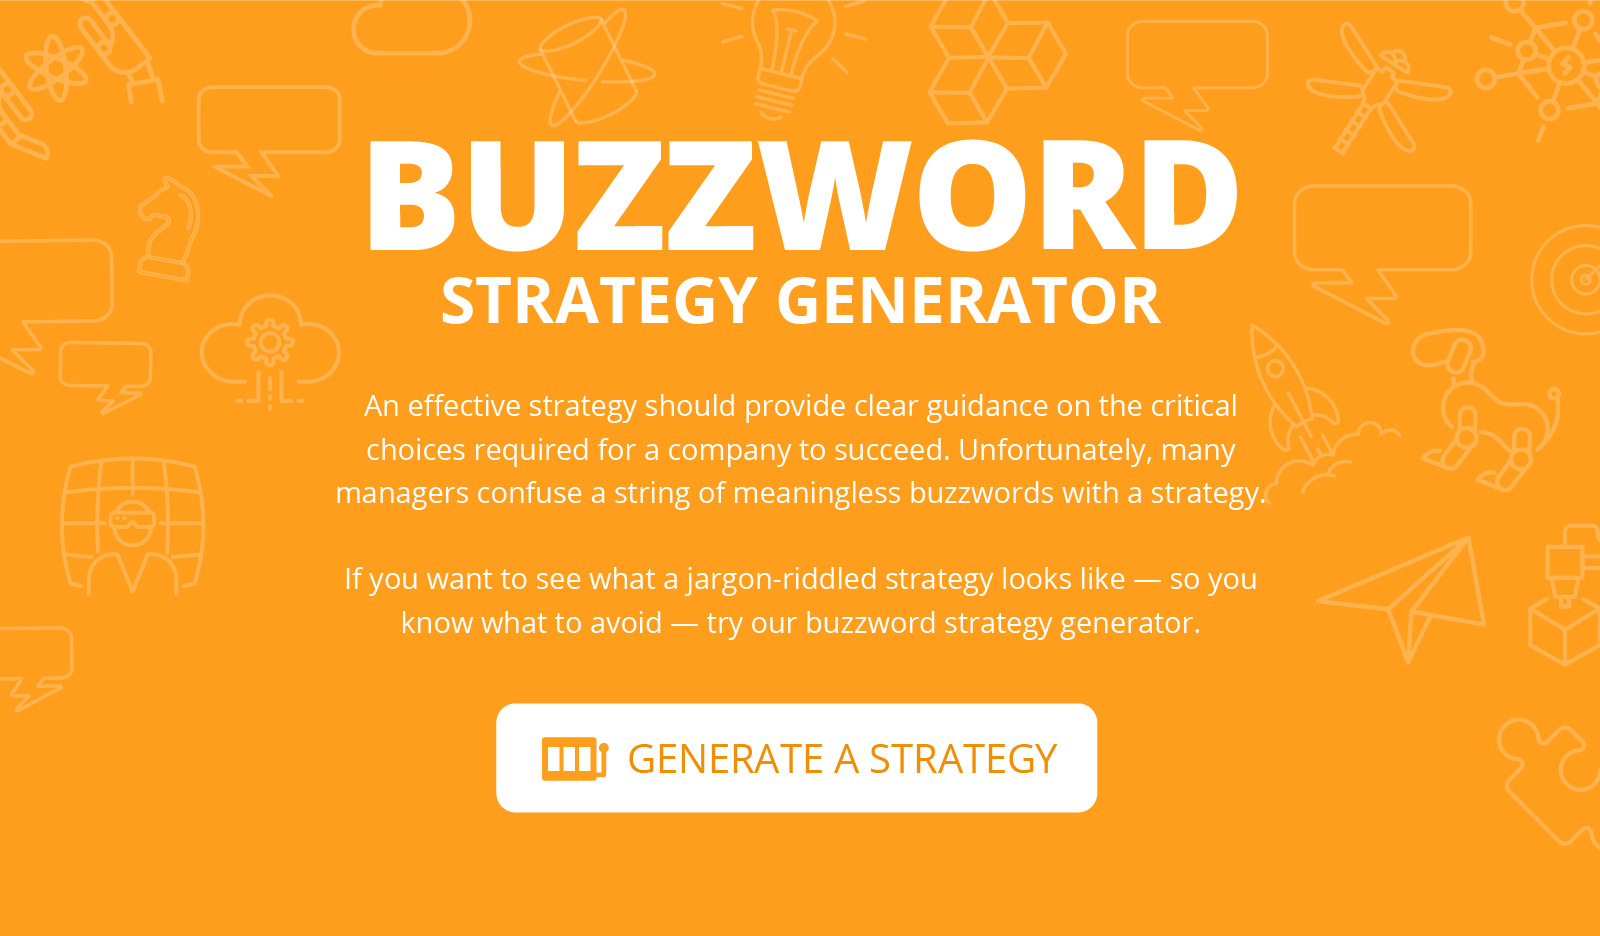 CLICK TO GENERATE YOUR STRATEGY